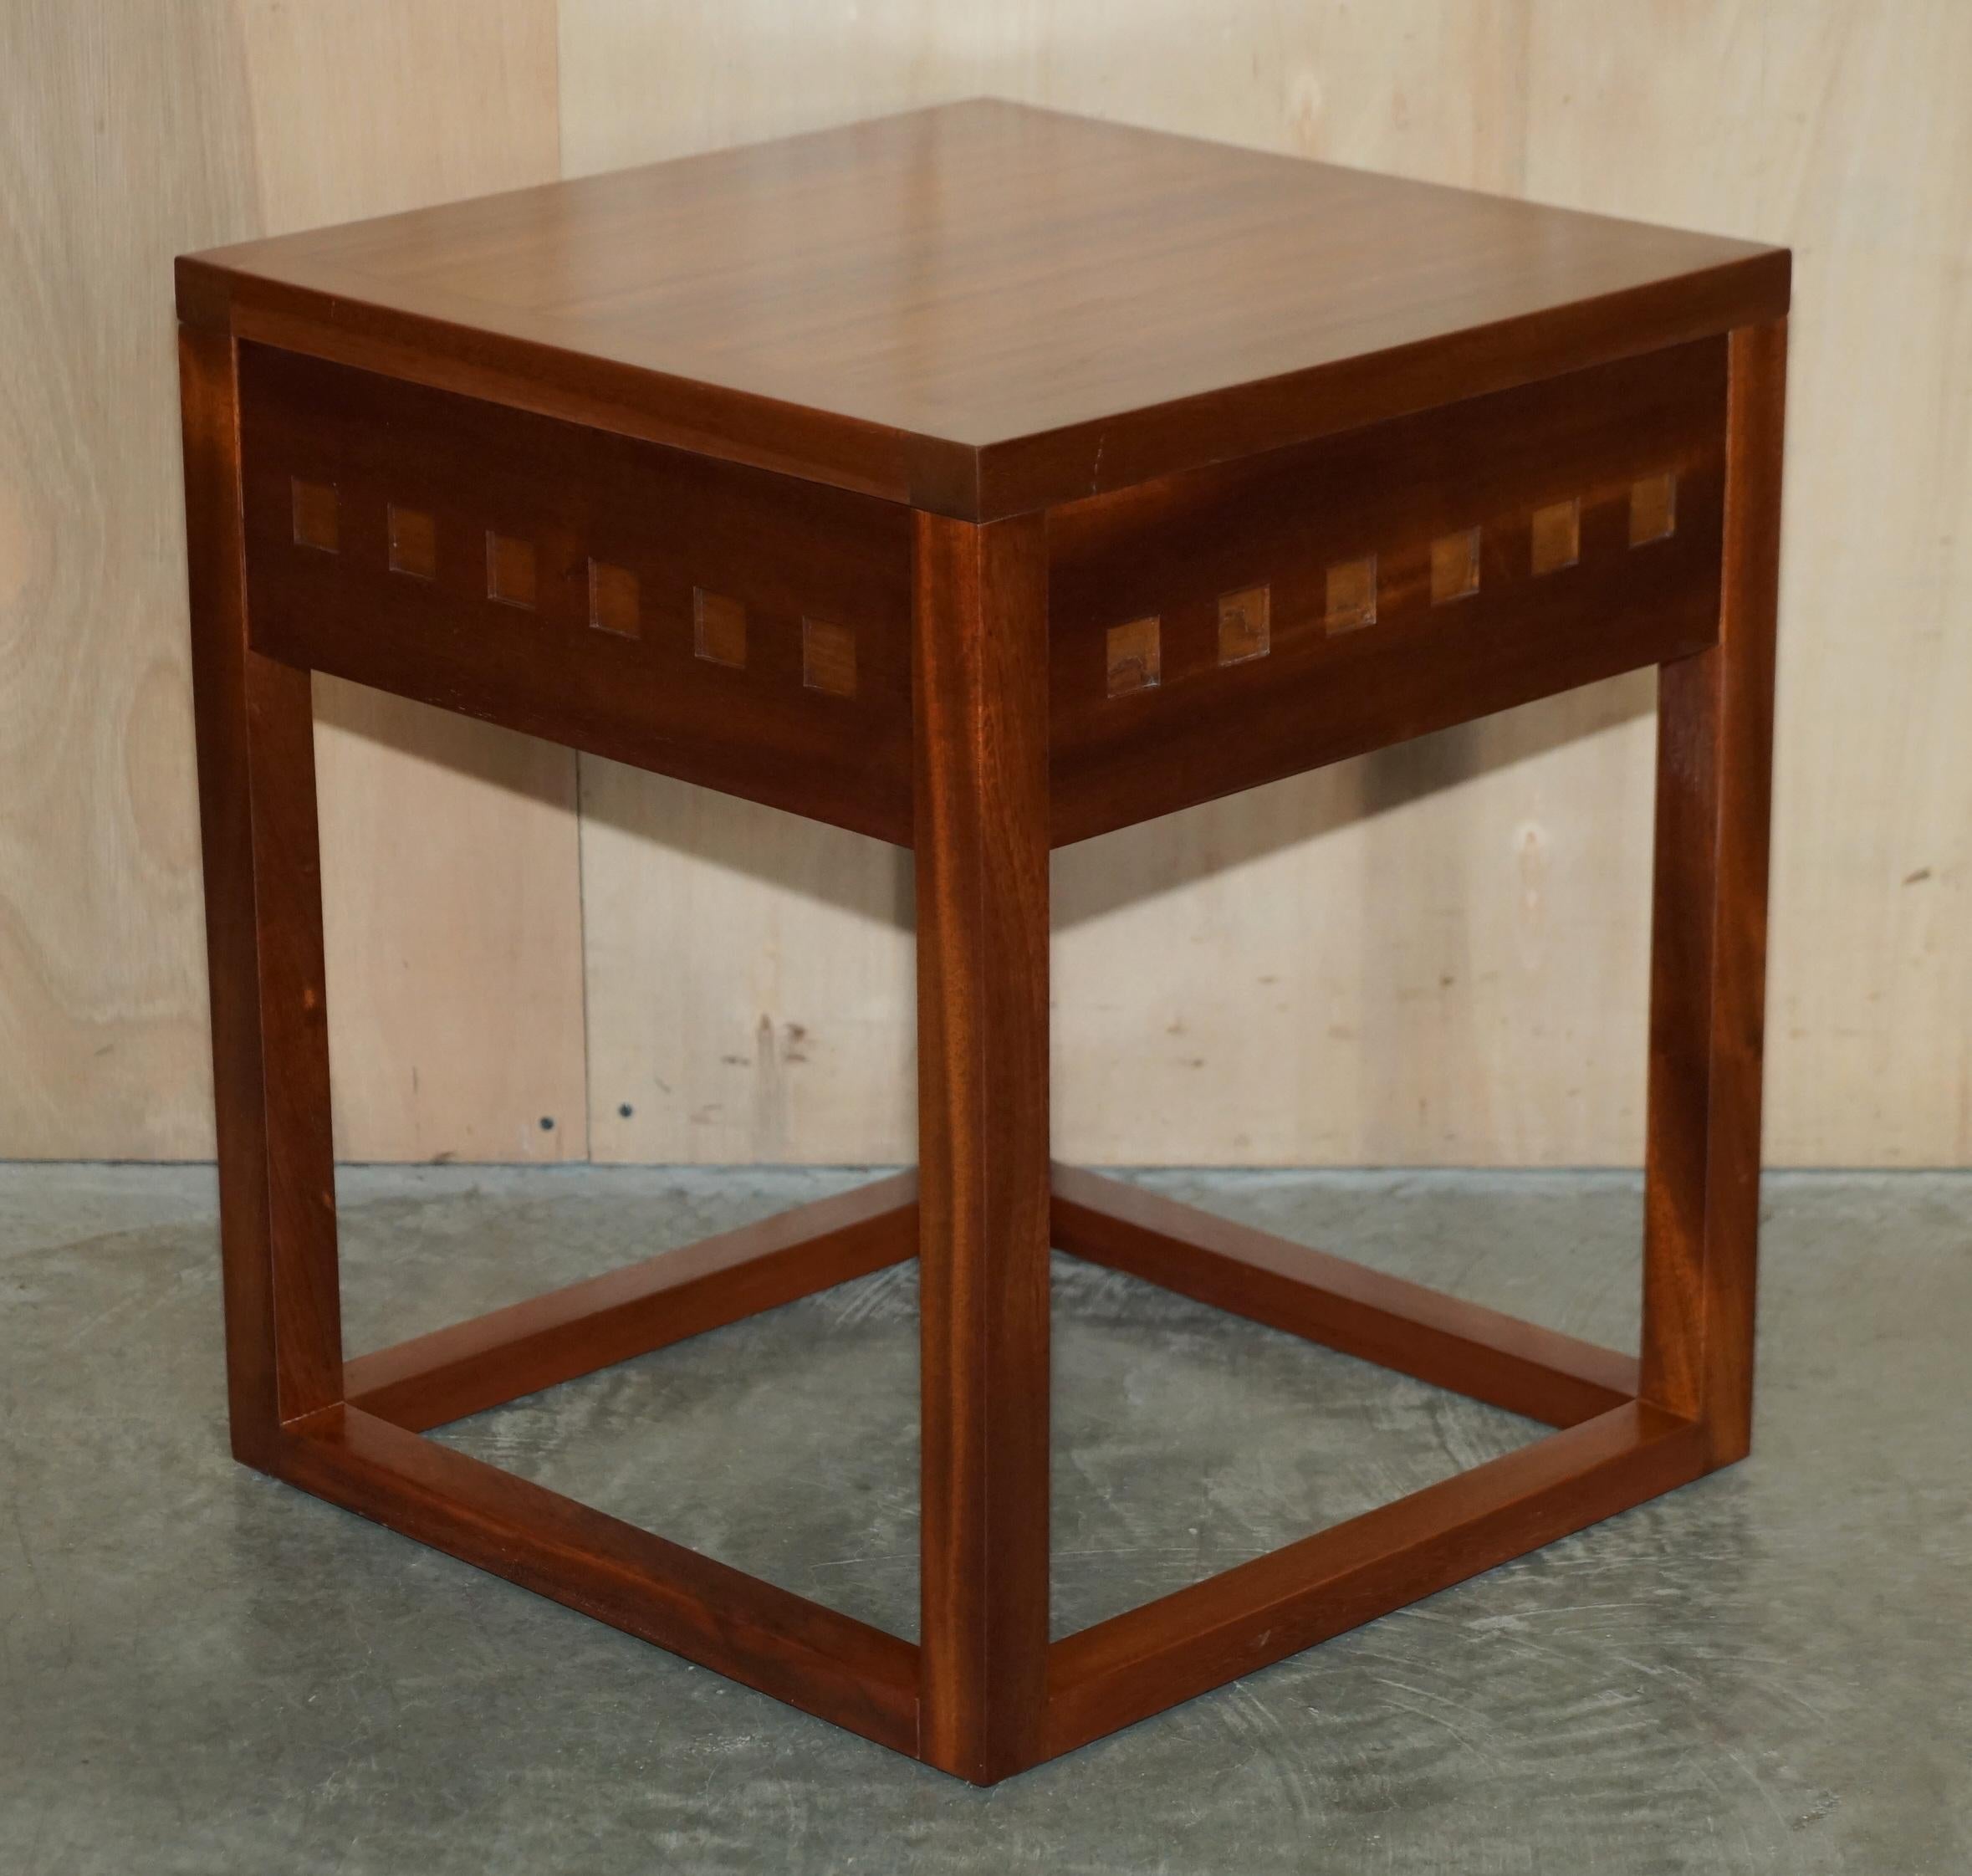 We are delighted to offer for sale this lovely pair of Cherry wood and teak side tables which are part of a set

These are very well made and good-looking,the teak and cherry give them a nice natural feel

The condition is very good, we have